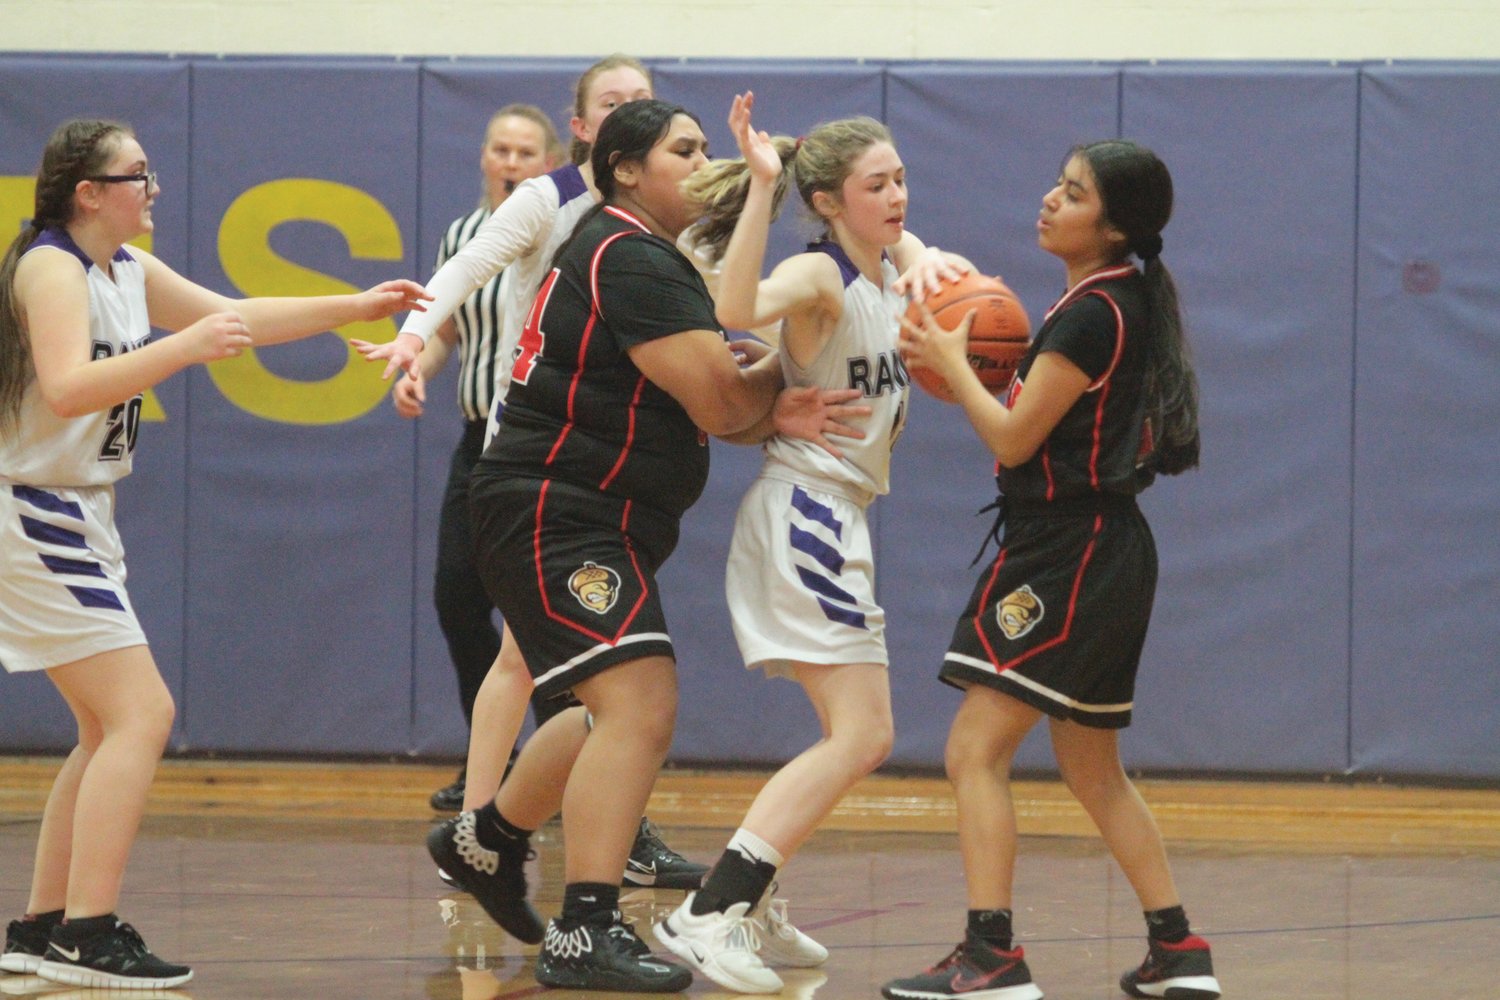 Brianne Evans tries to push away a defending Savannah McBride during the first half of last week’s game. Evans was called for an offensive foul.